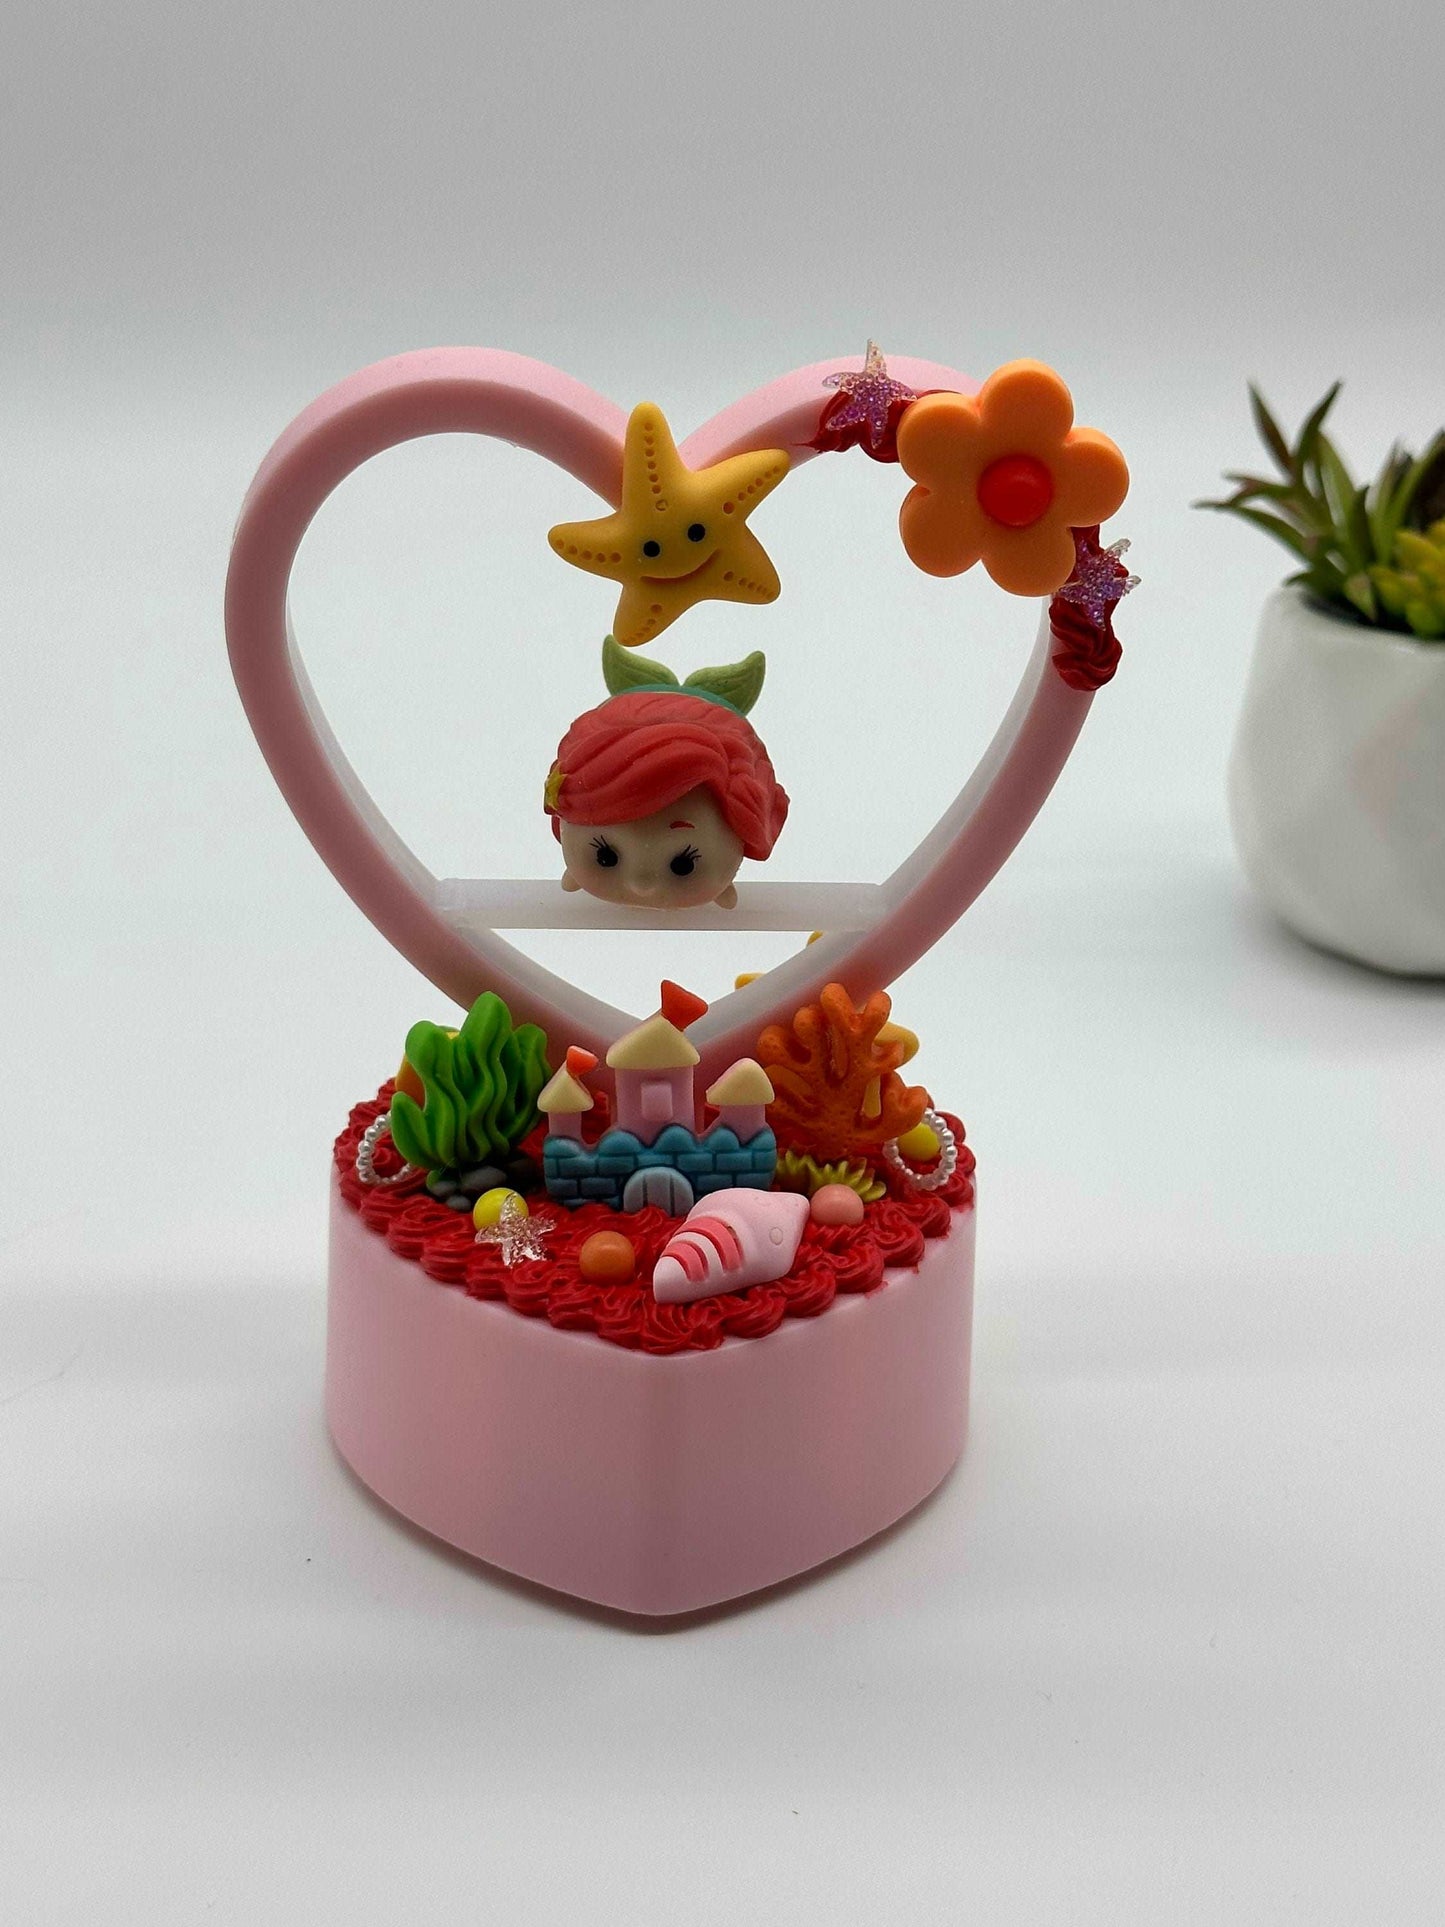 Little Accent Table Night Light, Lamp, Mermaid or Love Mouse Theme, Theme Park Engagement, Heart Shape Lamp Personalize option